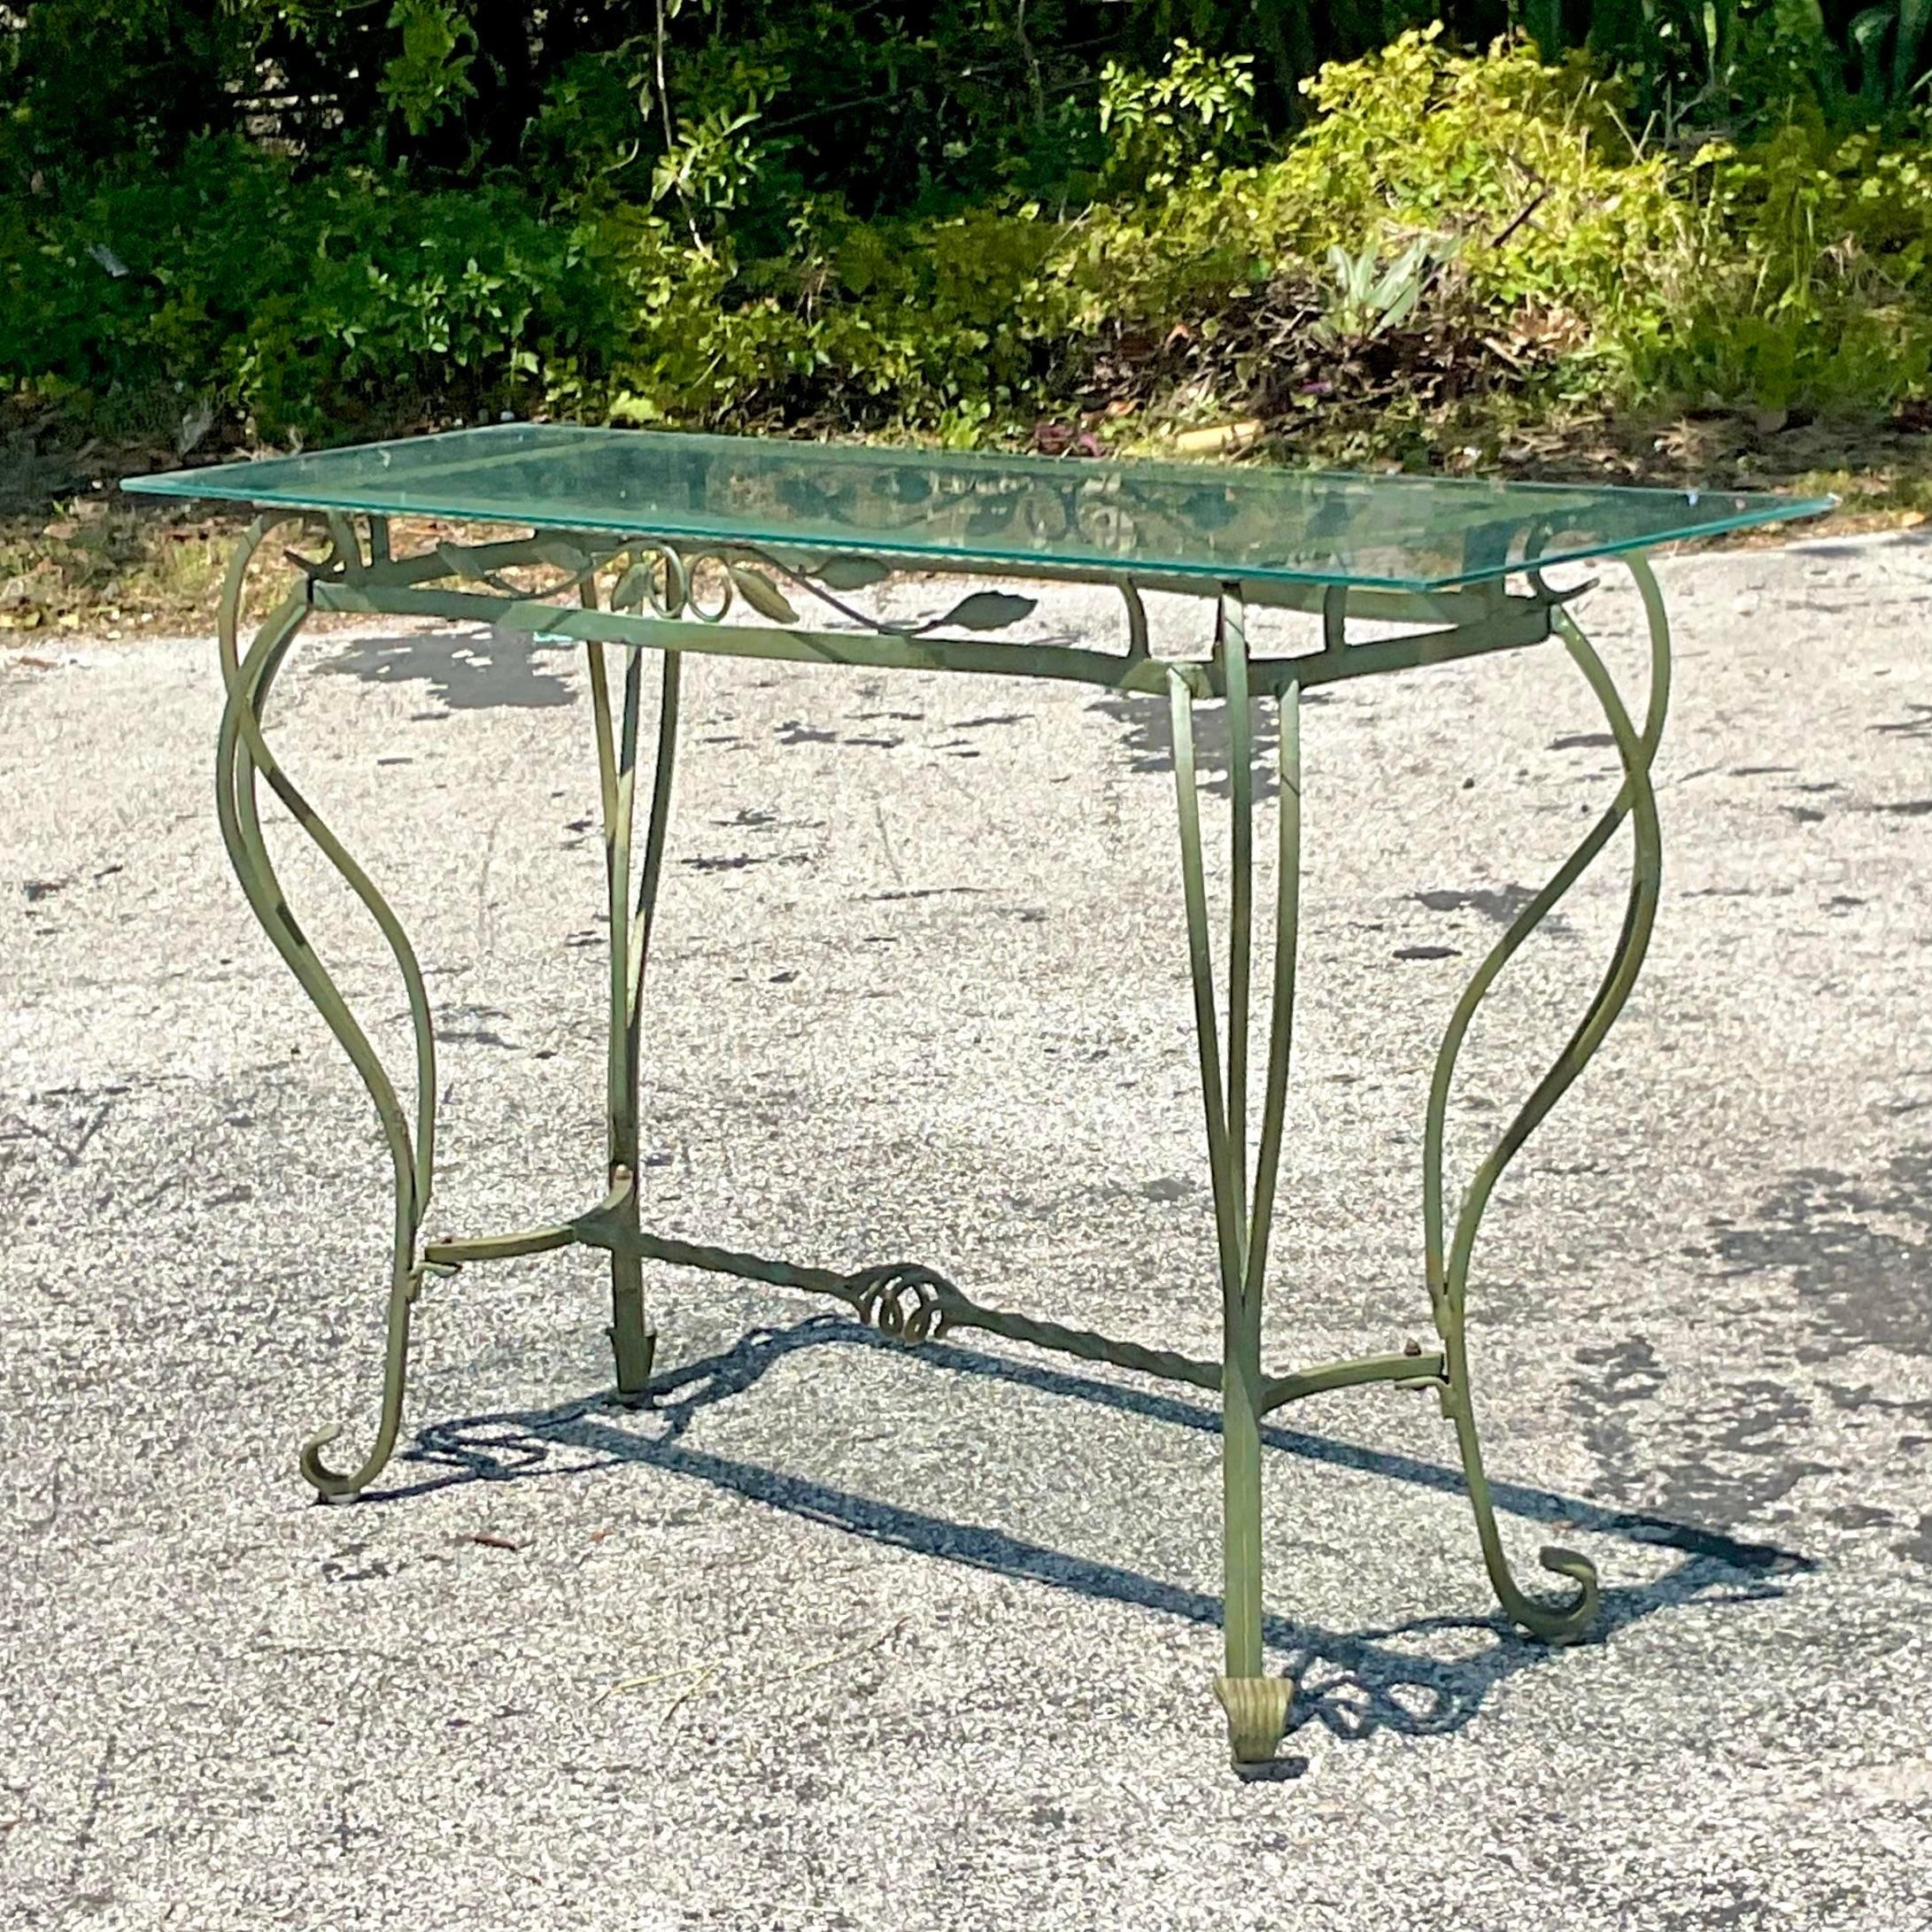 Introducing our Vintage Regency Wrought Iron Leaf Console Table, a graceful fusion of nature-inspired design and American craftsmanship. Crafted with intricate leaf motifs and sturdy wrought iron, this table exudes timeless elegance while seamlessly